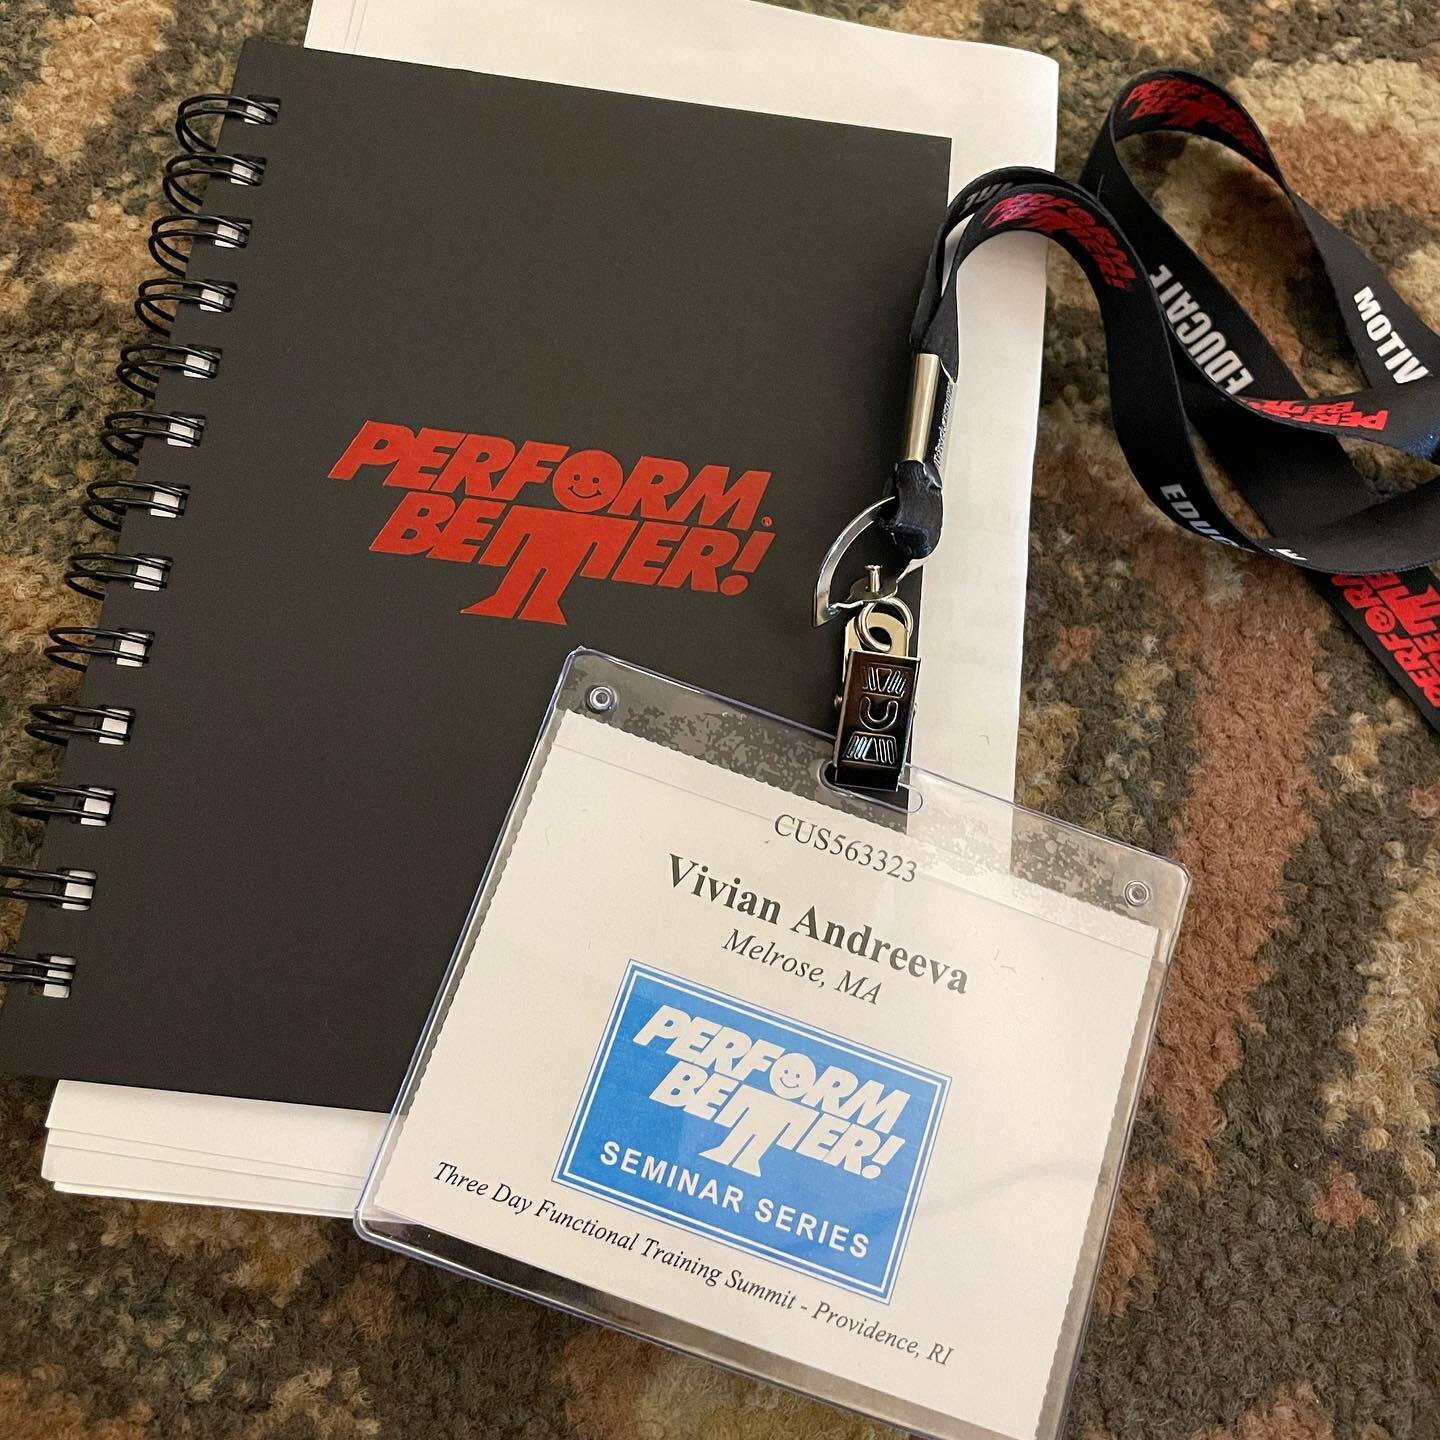 My first trip to the Perform Better Summit was amazing! I love learning as much as I can from as many people as I can on how to be a better coach. I certainly learned a lot, met some new friends, and met incredible coaches. See you all this week for 